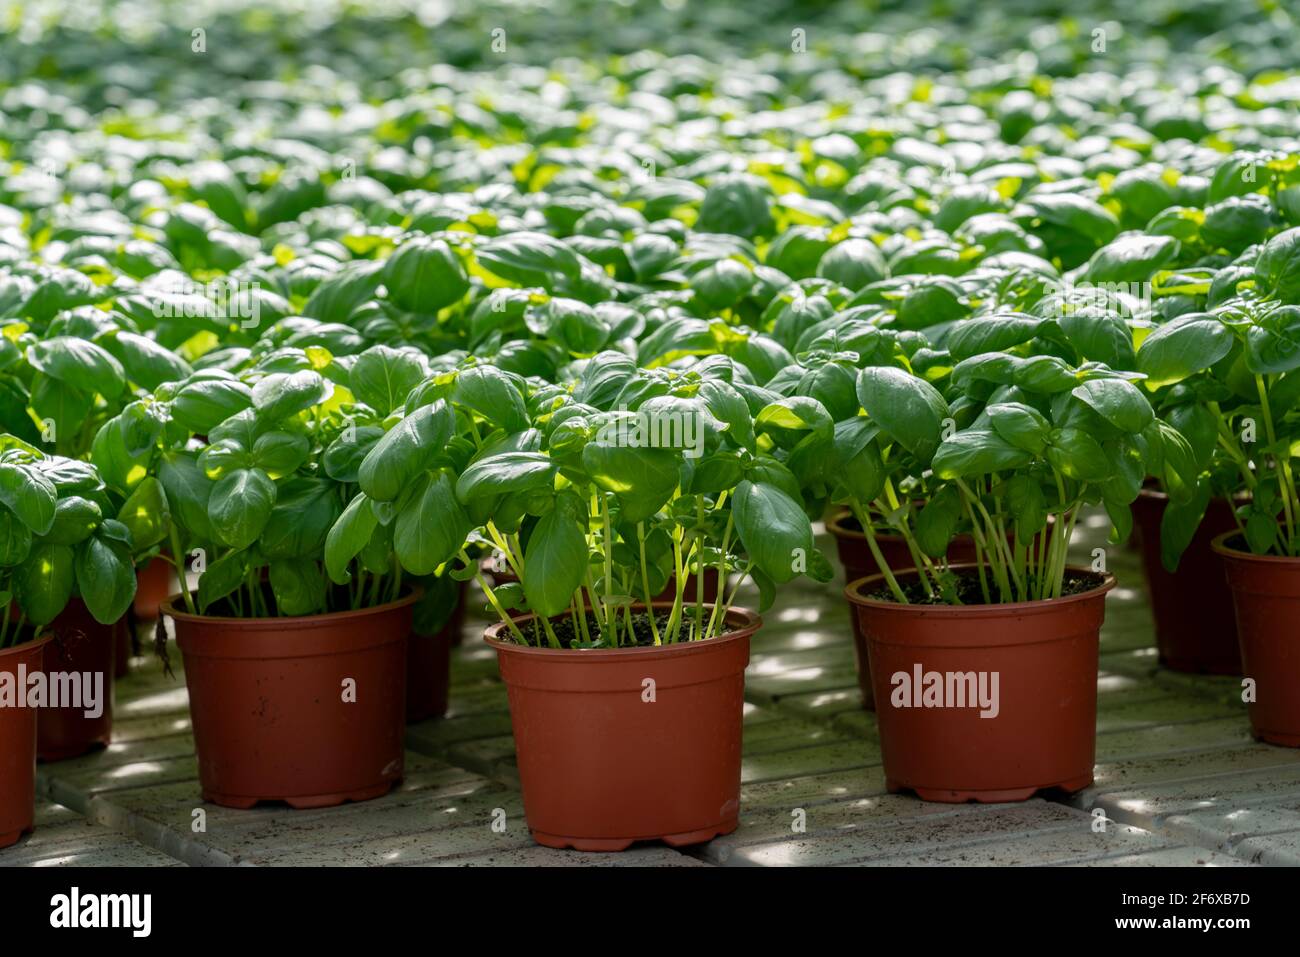 Agriculture, herb gardening, basil plants in pots, in a greenhouse Stock Photo